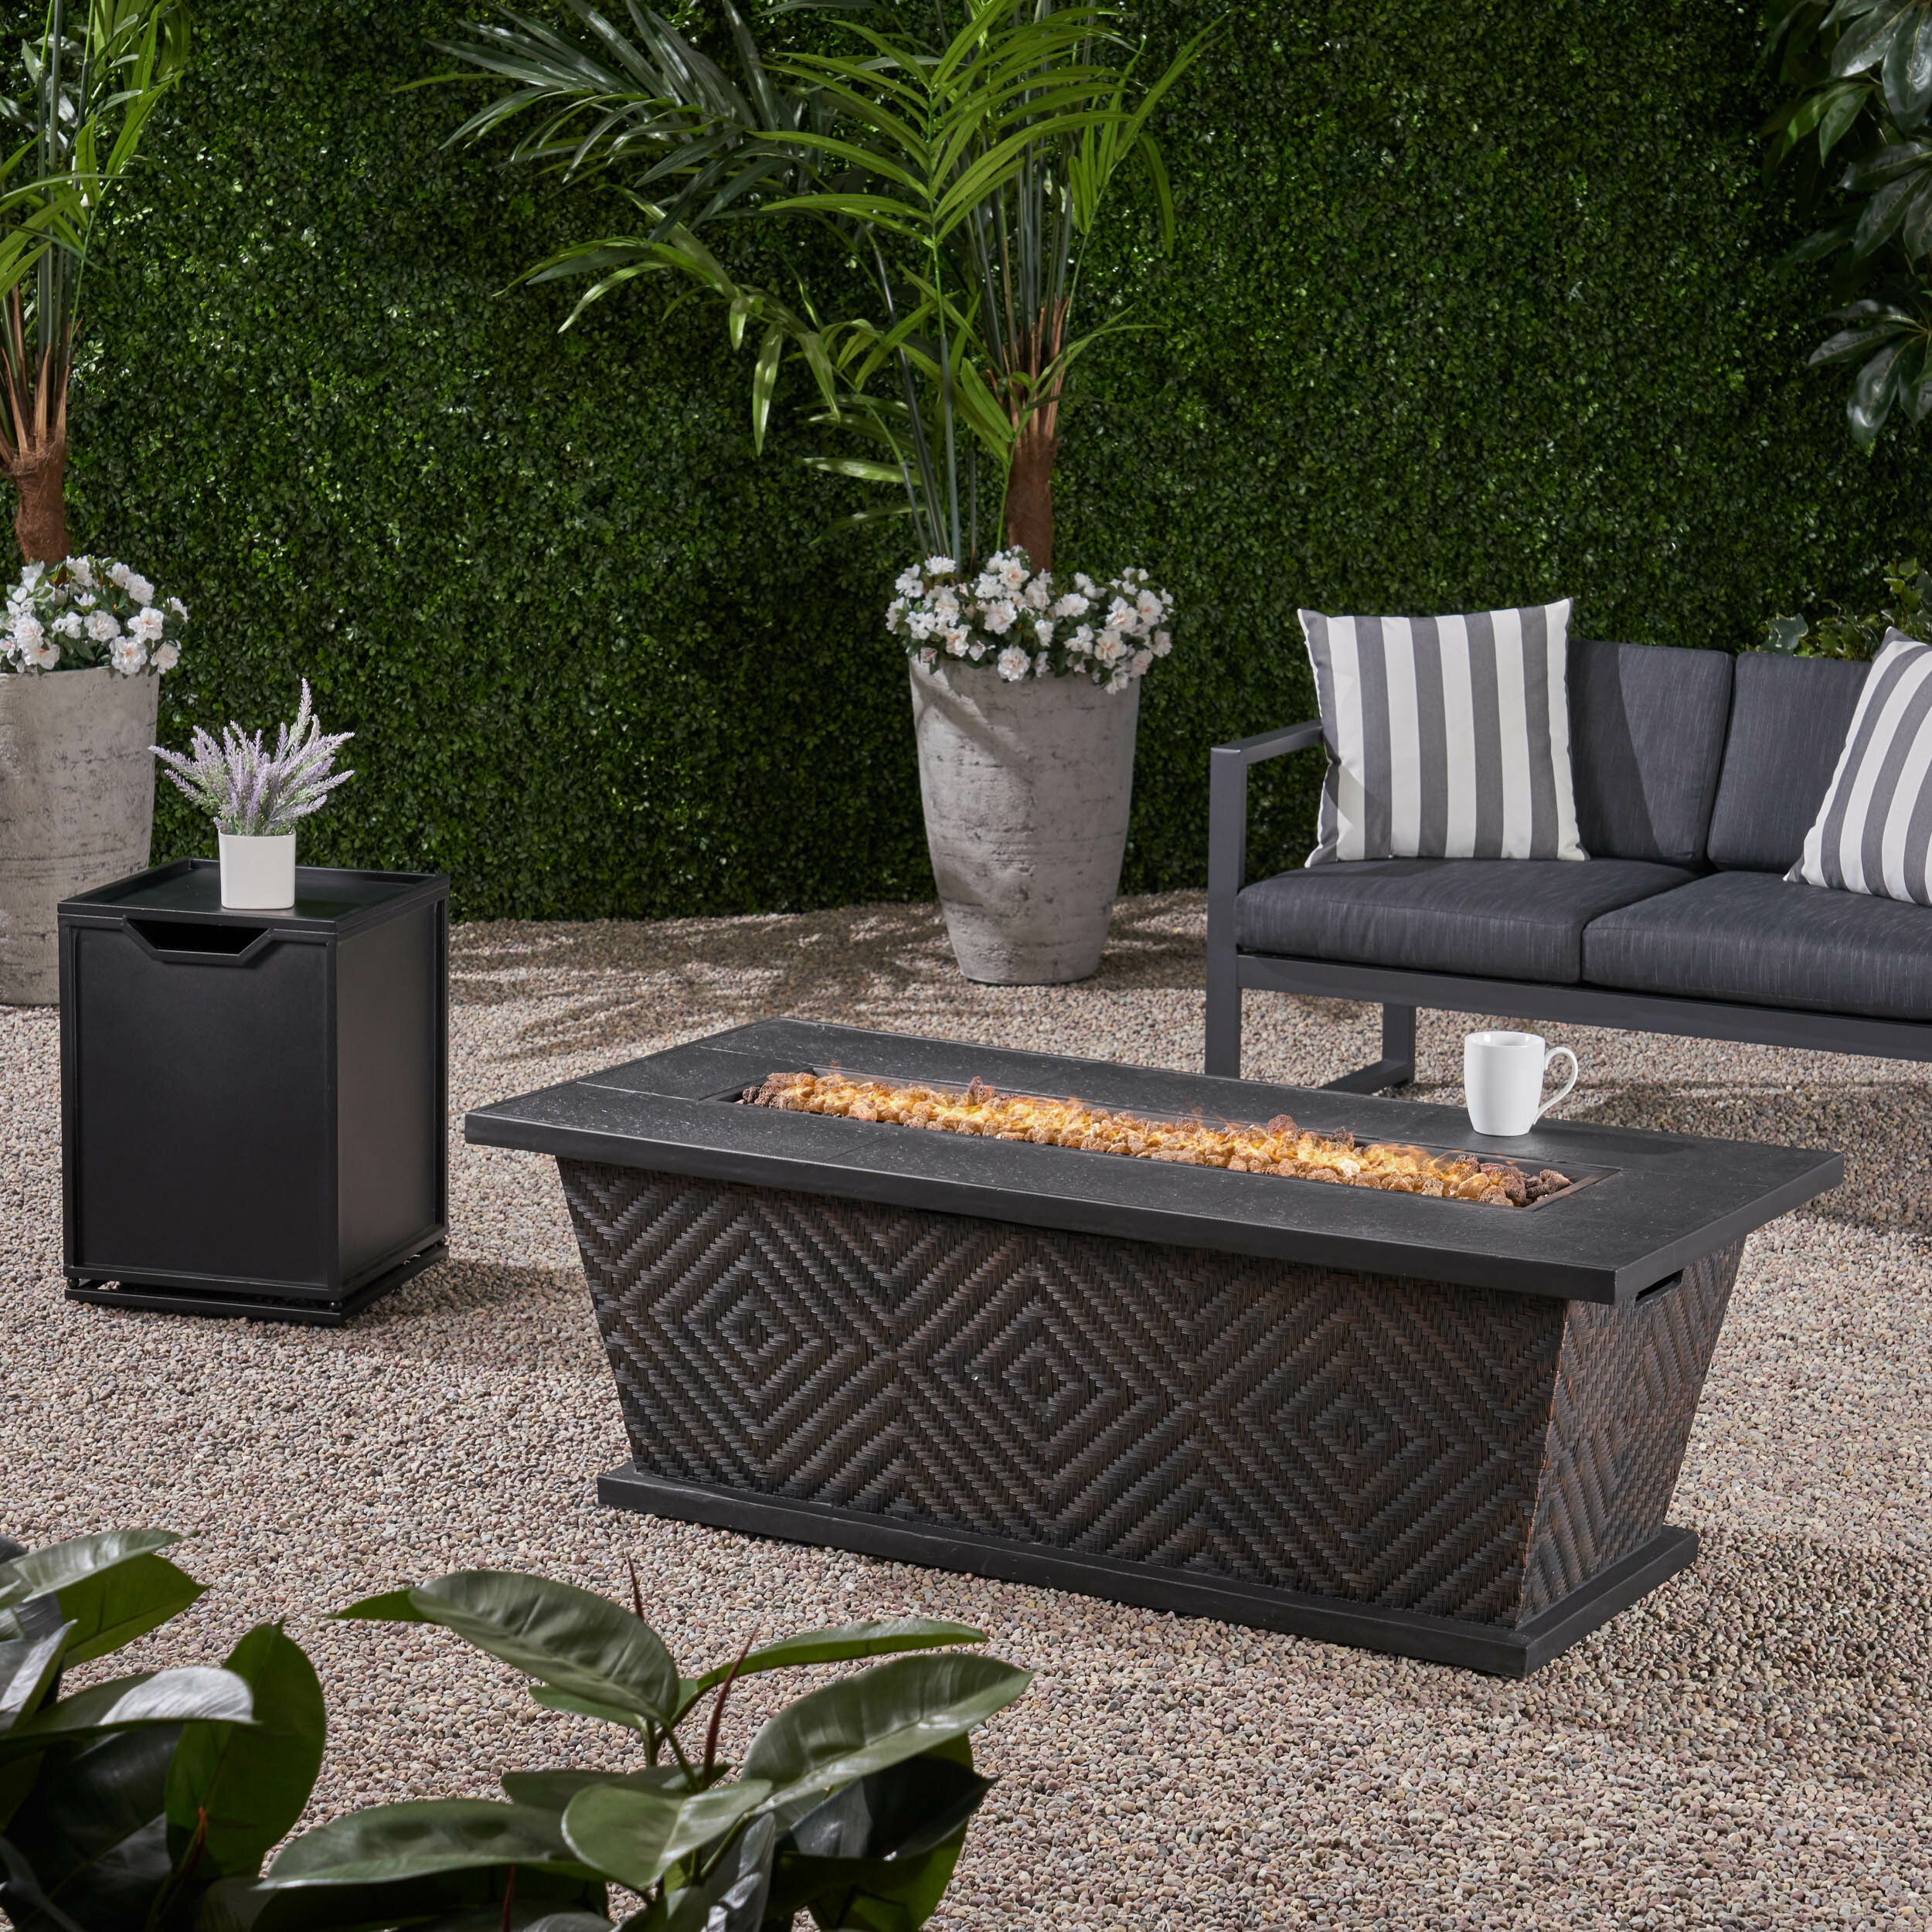 Foundry Select Patricia 19 H X 5625 W Propane Outdoor Fire Pit Table Reviews Wayfair